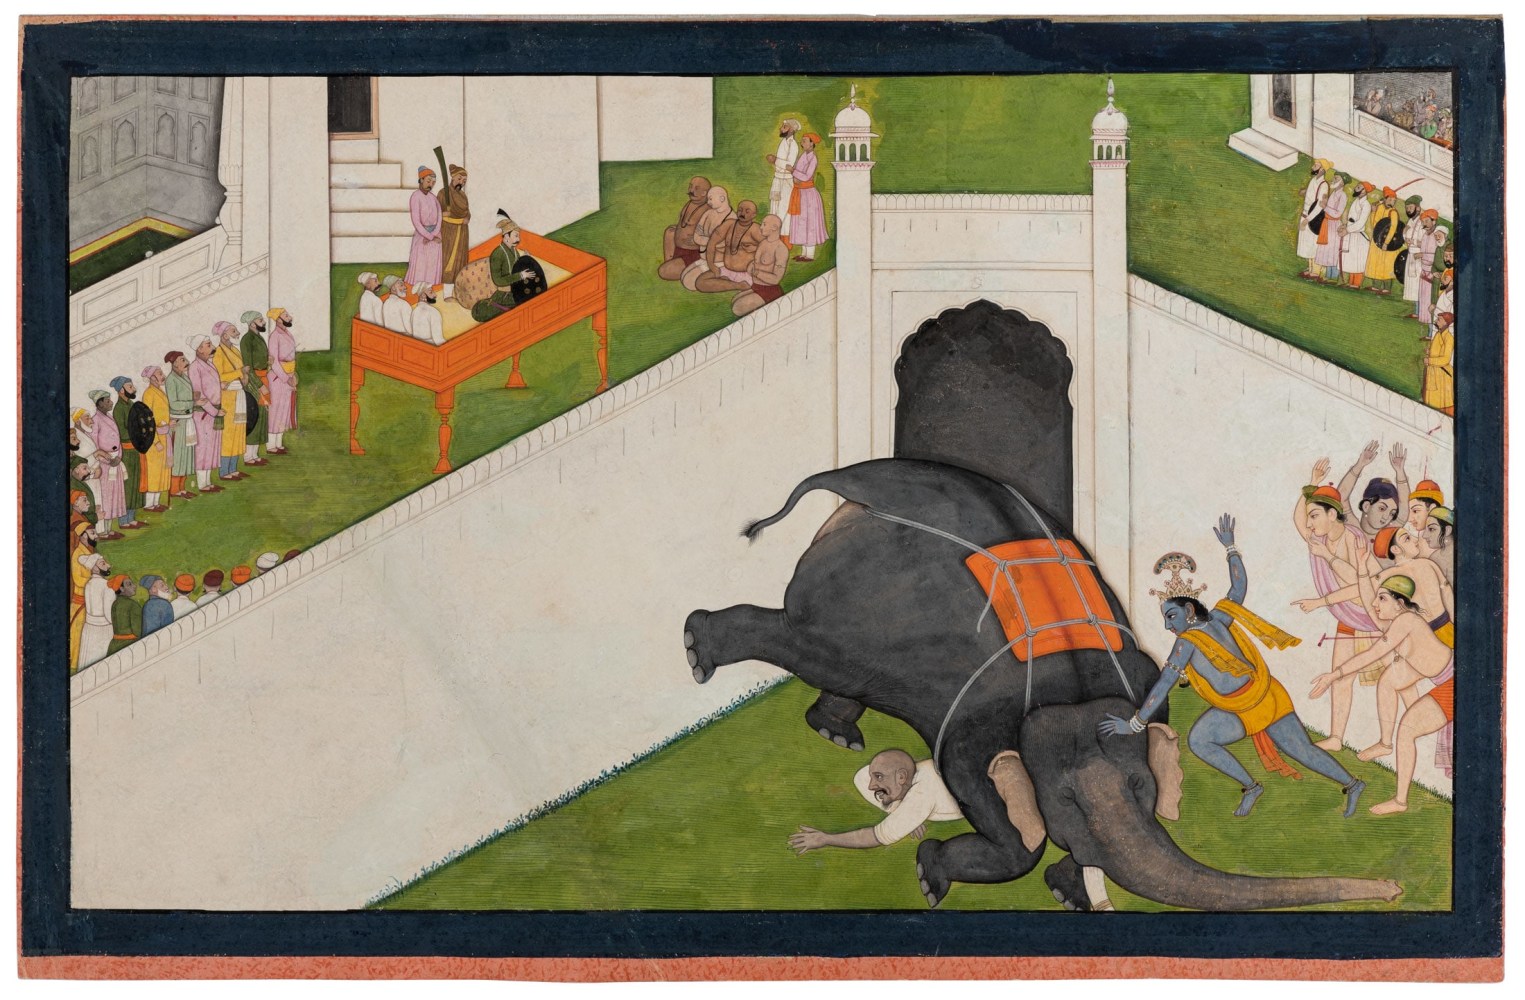 Krishna slays Kuvalayapida, 1765-70
Folio from the &amp;lsquo;Second Guler&amp;rsquo; or &amp;lsquo;Tehri-Garhwal&amp;rsquo; Gitagovinda
Master of the first generation after Manaku and Nainsukh of Guler
Tempera, opaque pigments on paper with gold pigment
Folio: 7 1/8 x 10 7/8 inches (18.1 x 27.7 cm)
Painting: 6 1/8 x 10 1/8 inches (15.3 x 25.7 cm)